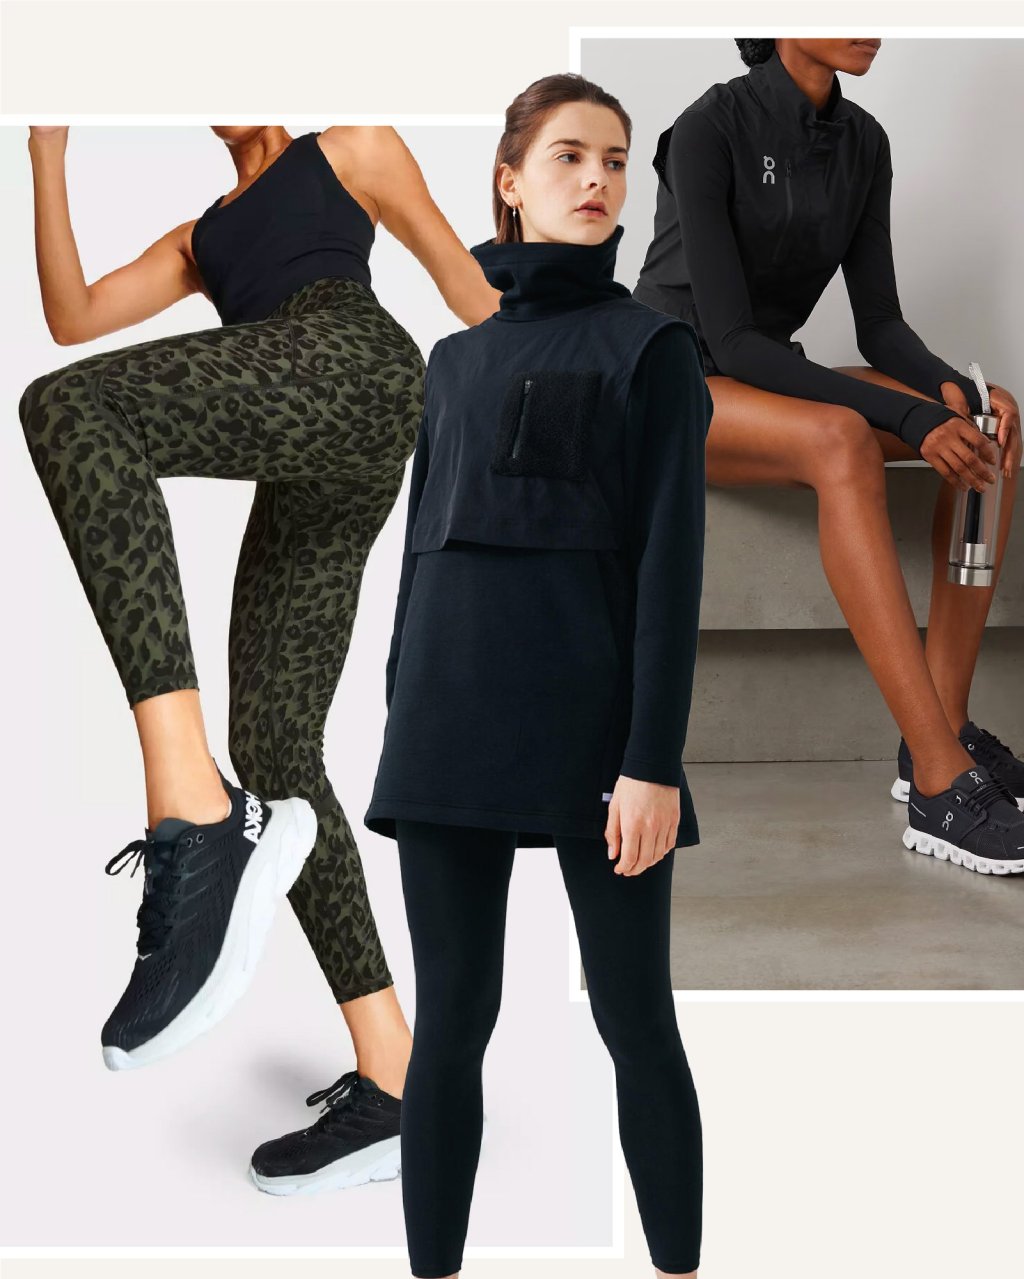 Shopping for winter gear? Don't forget to buy fleece-lined leggings